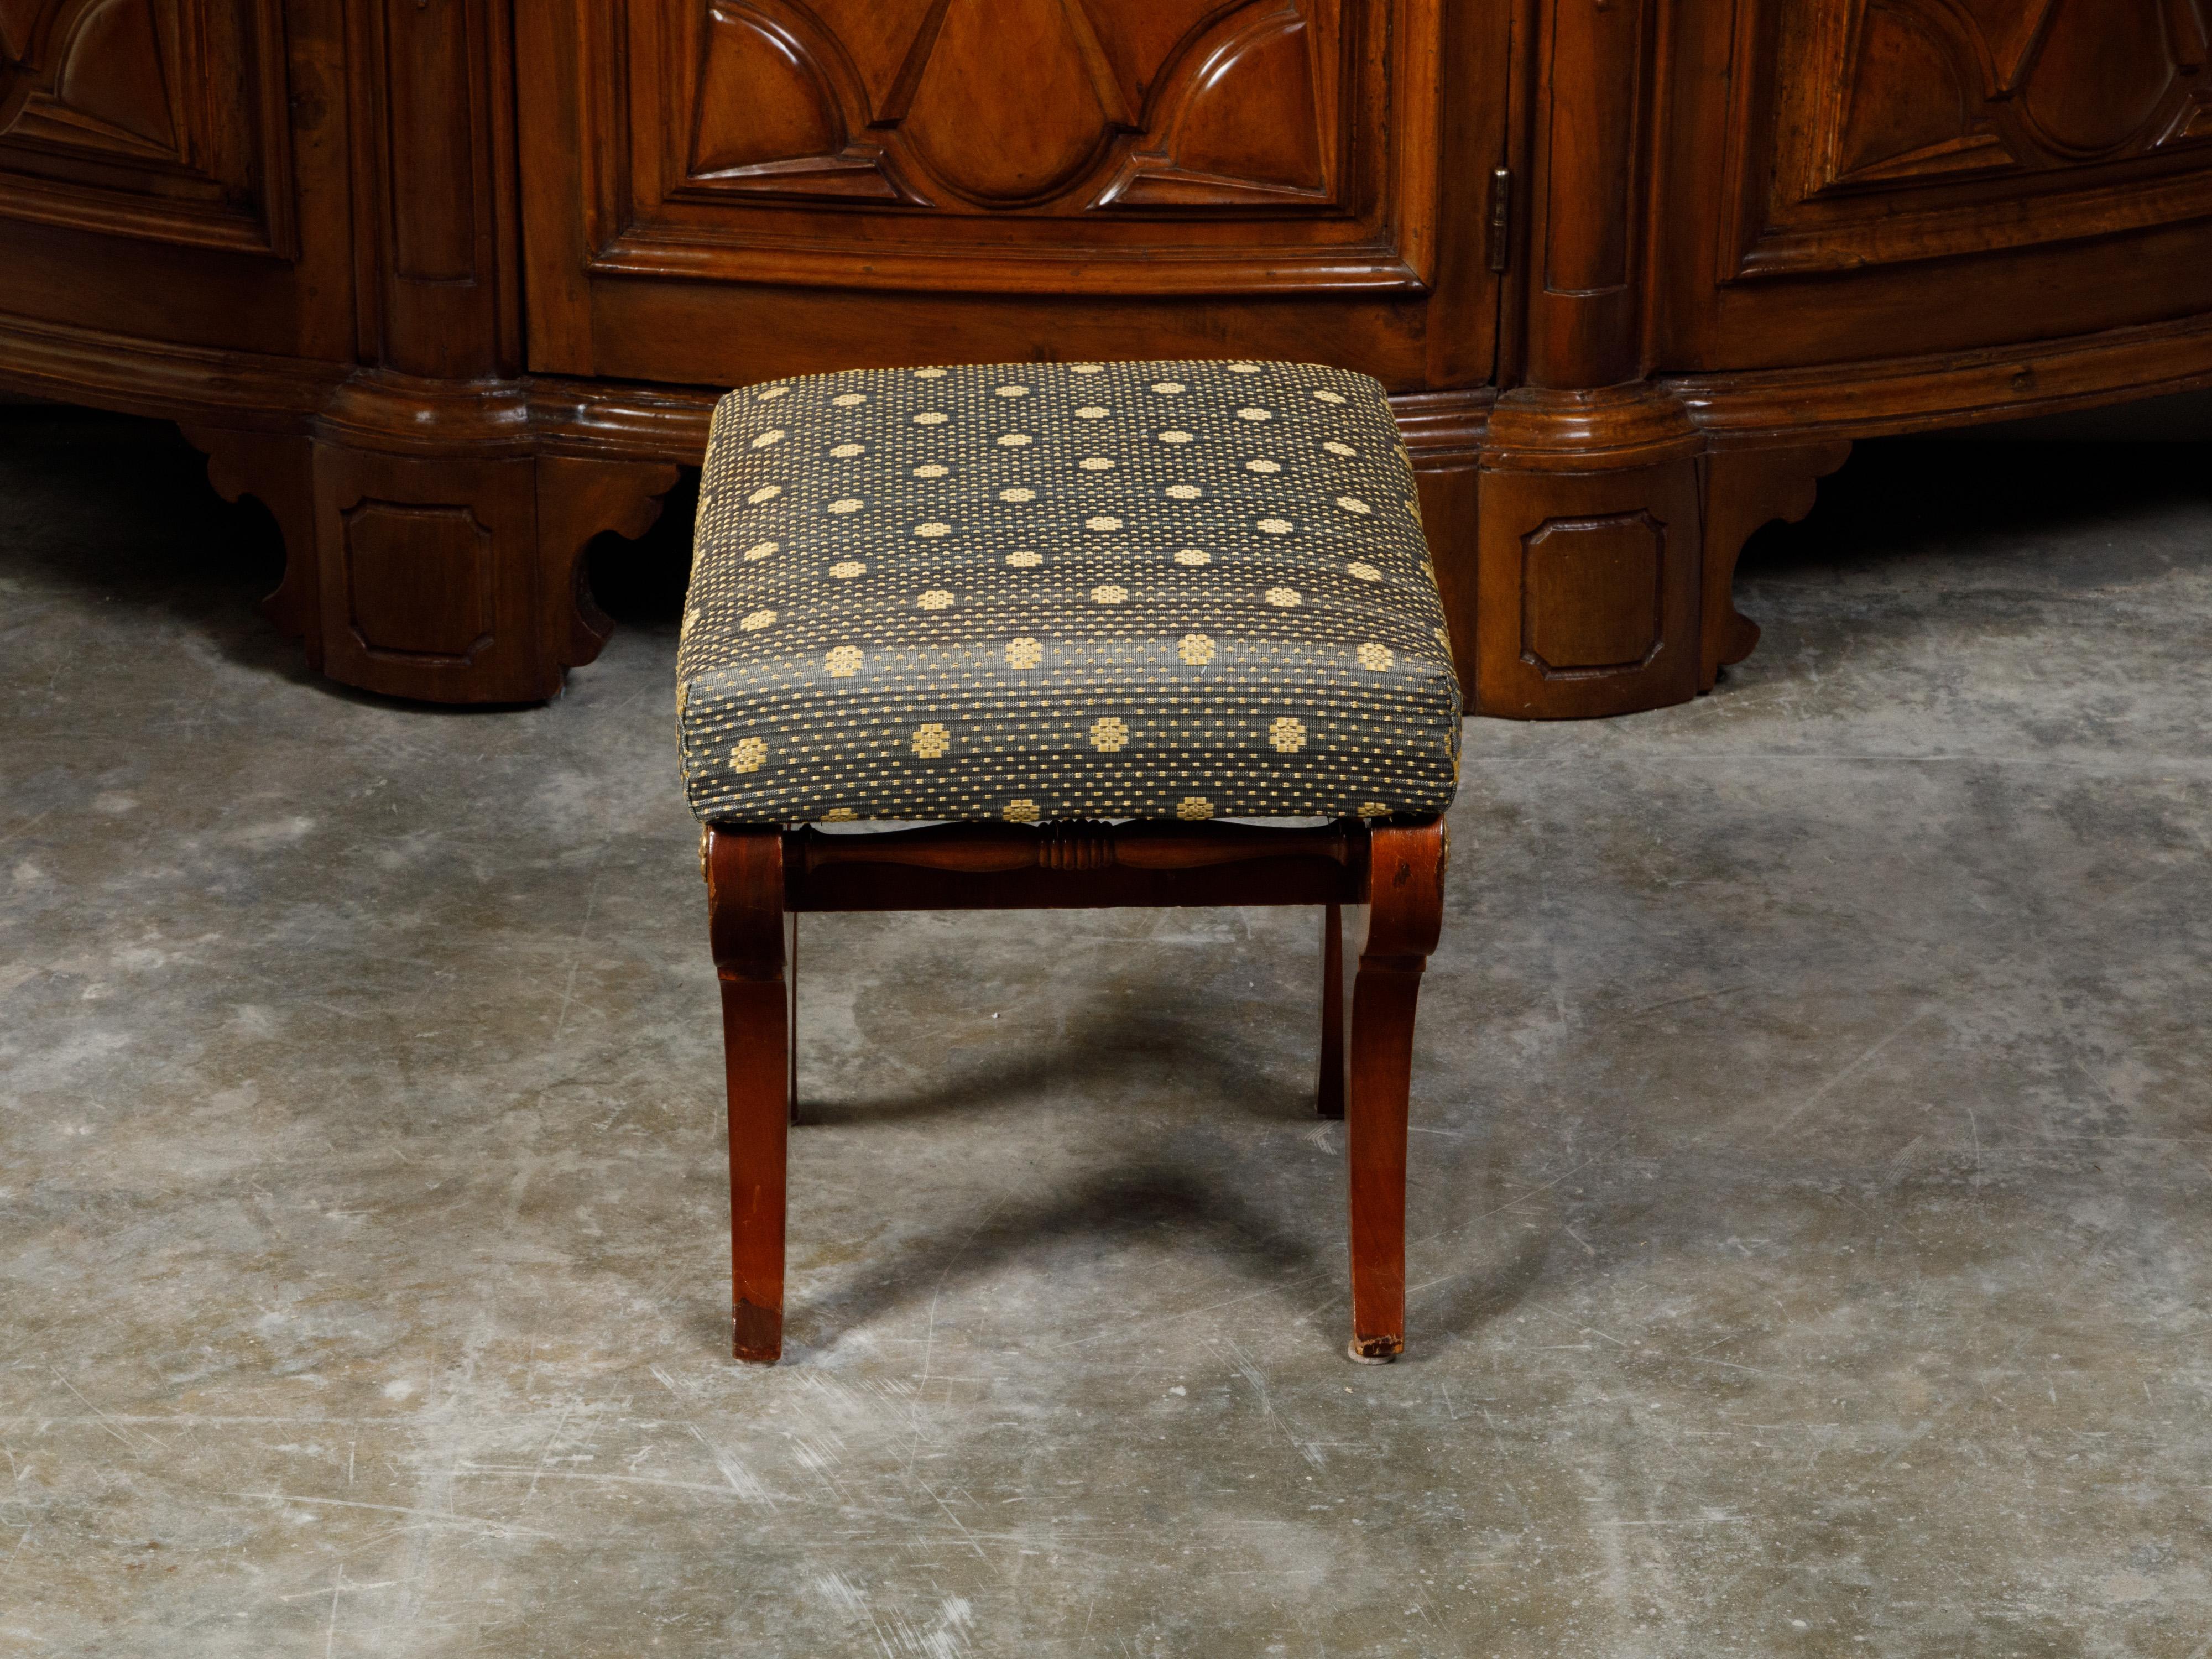 Biedermeier Period 19th Century Walnut Stool with Gilt Rosettes and Upholstery For Sale 4